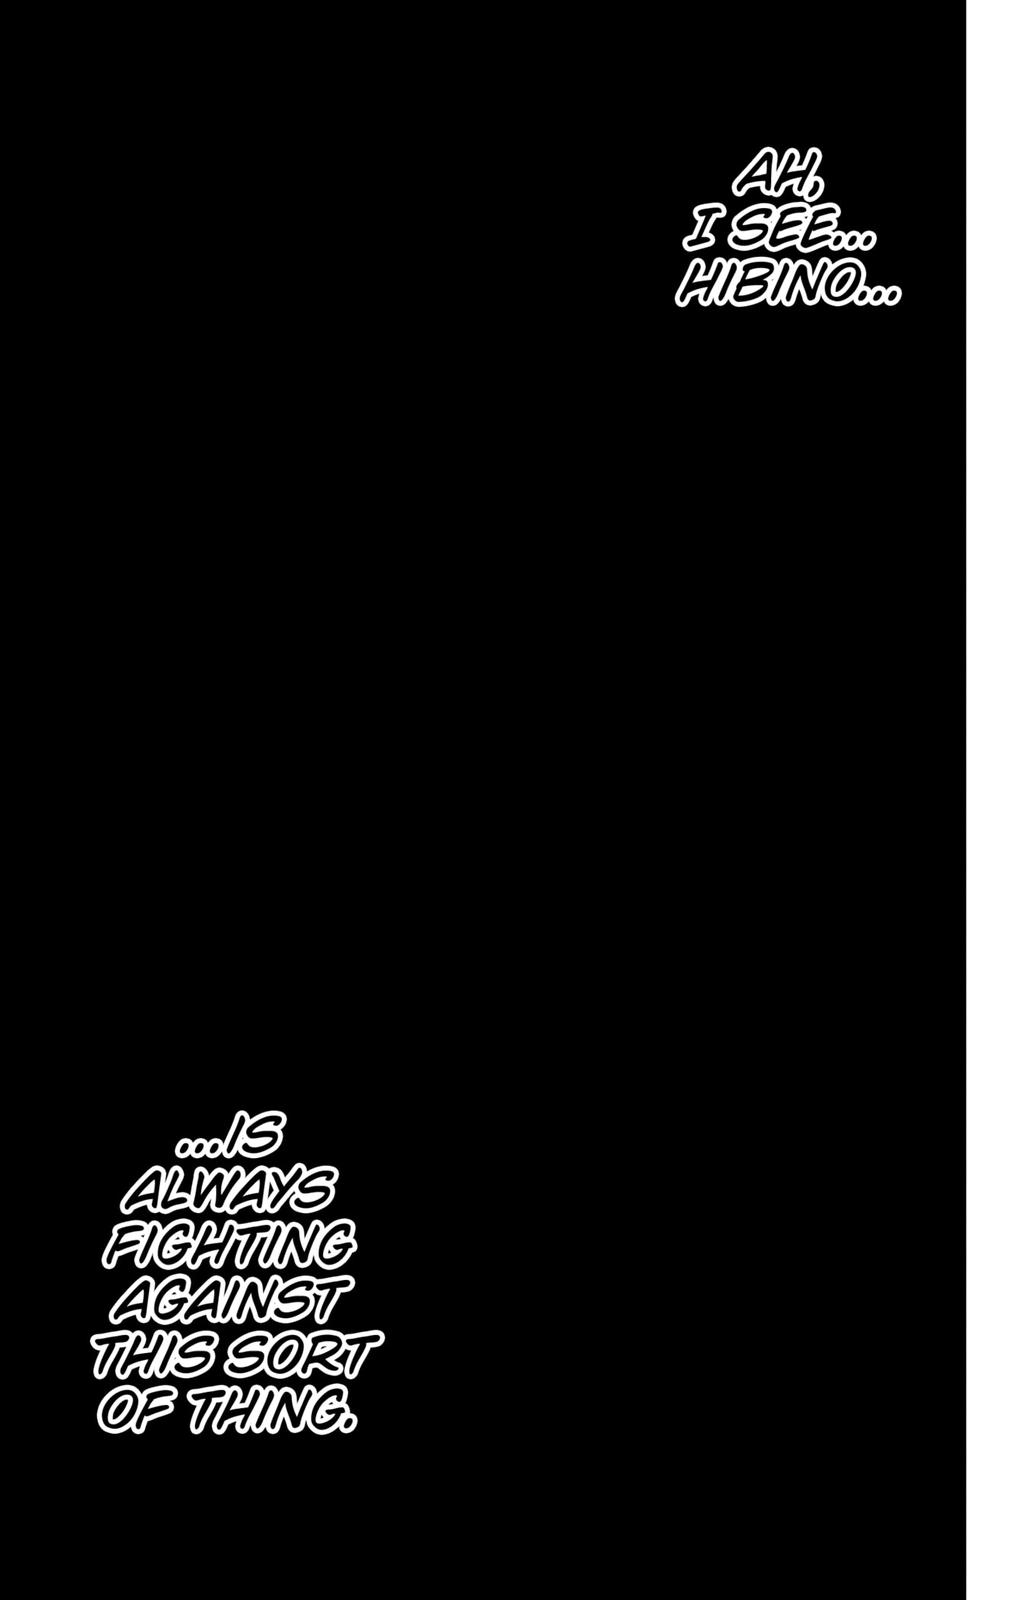 Kaiju no 8 Chapter 59, monster #8 chapter 59